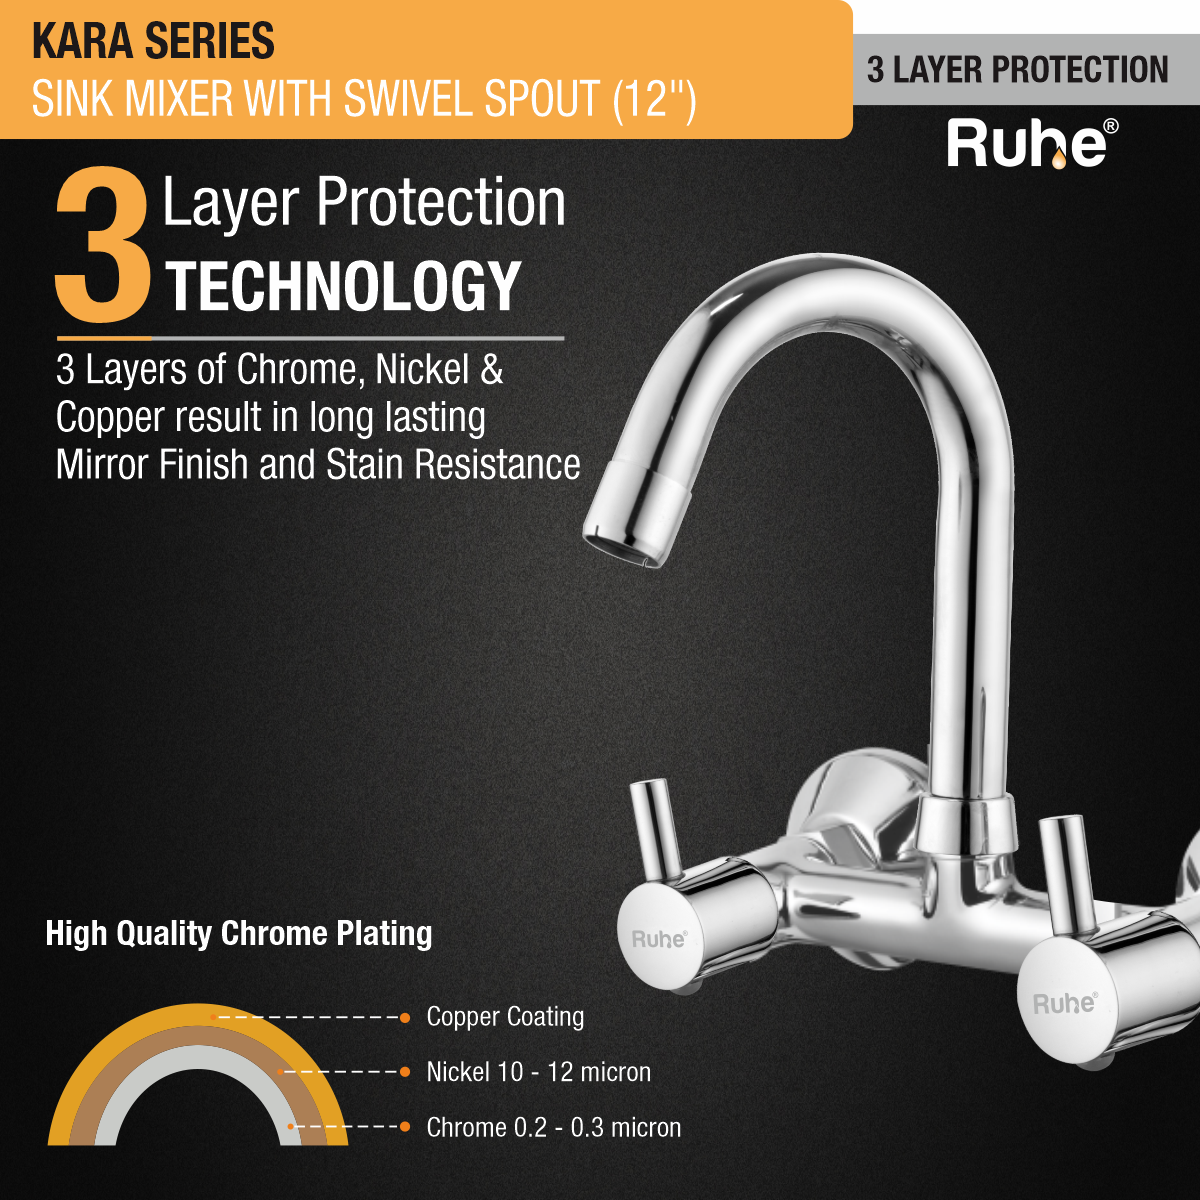 Kara Sink Mixer with Small (12 inches) Round Swivel Spout Faucet 3 layer protection